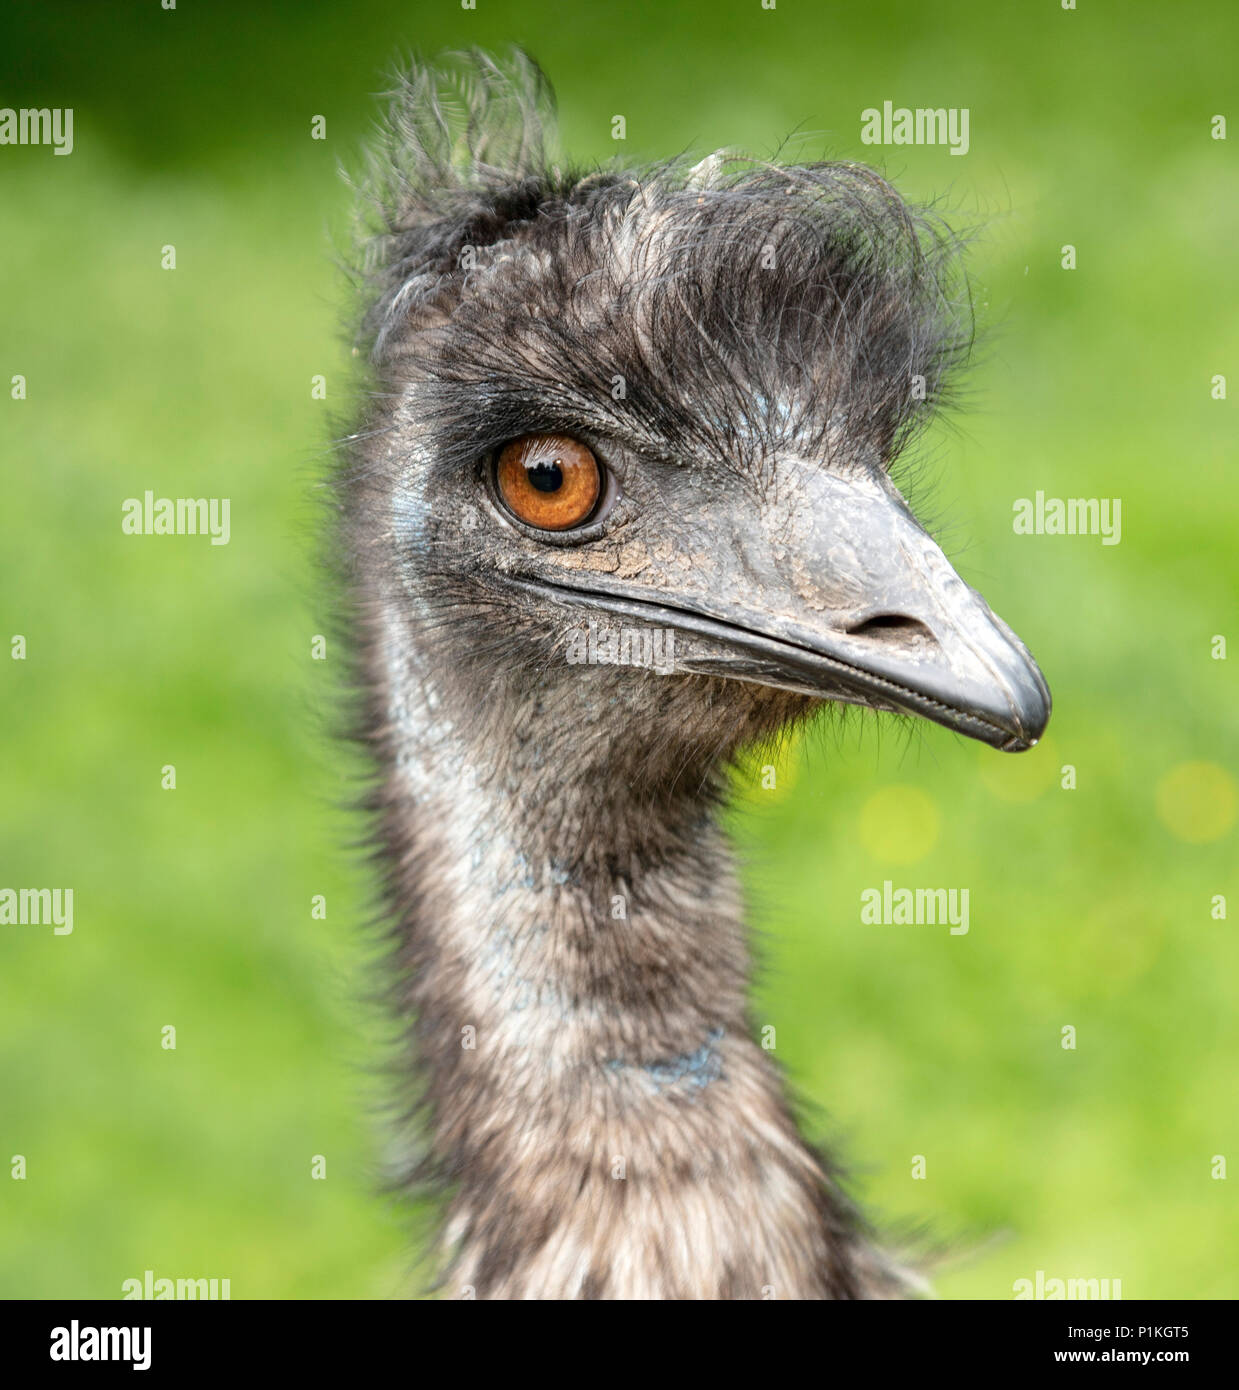 Amusing Picture Of An Emu Head Looking At Camera Stock Photo Alamy